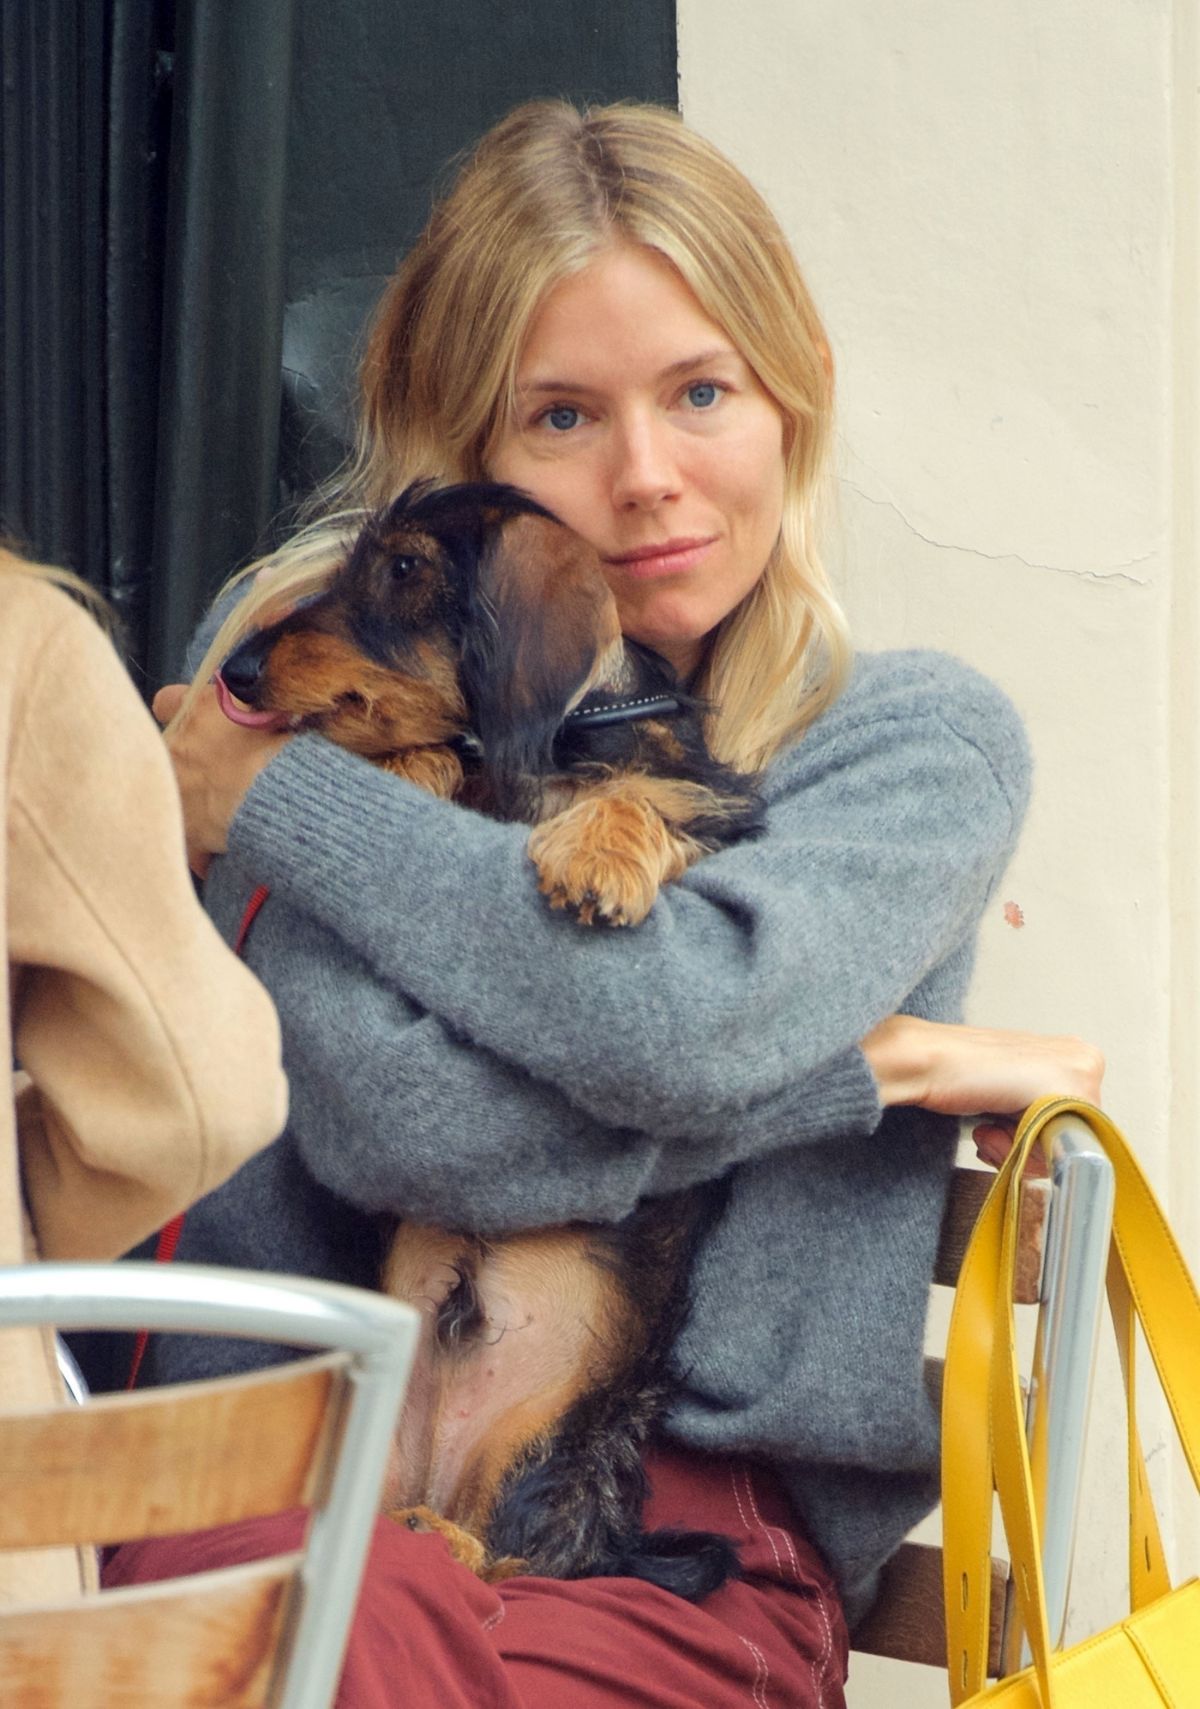 sienna-miller-out-with-her-dog-in-london-09-08-2020-2.jpg